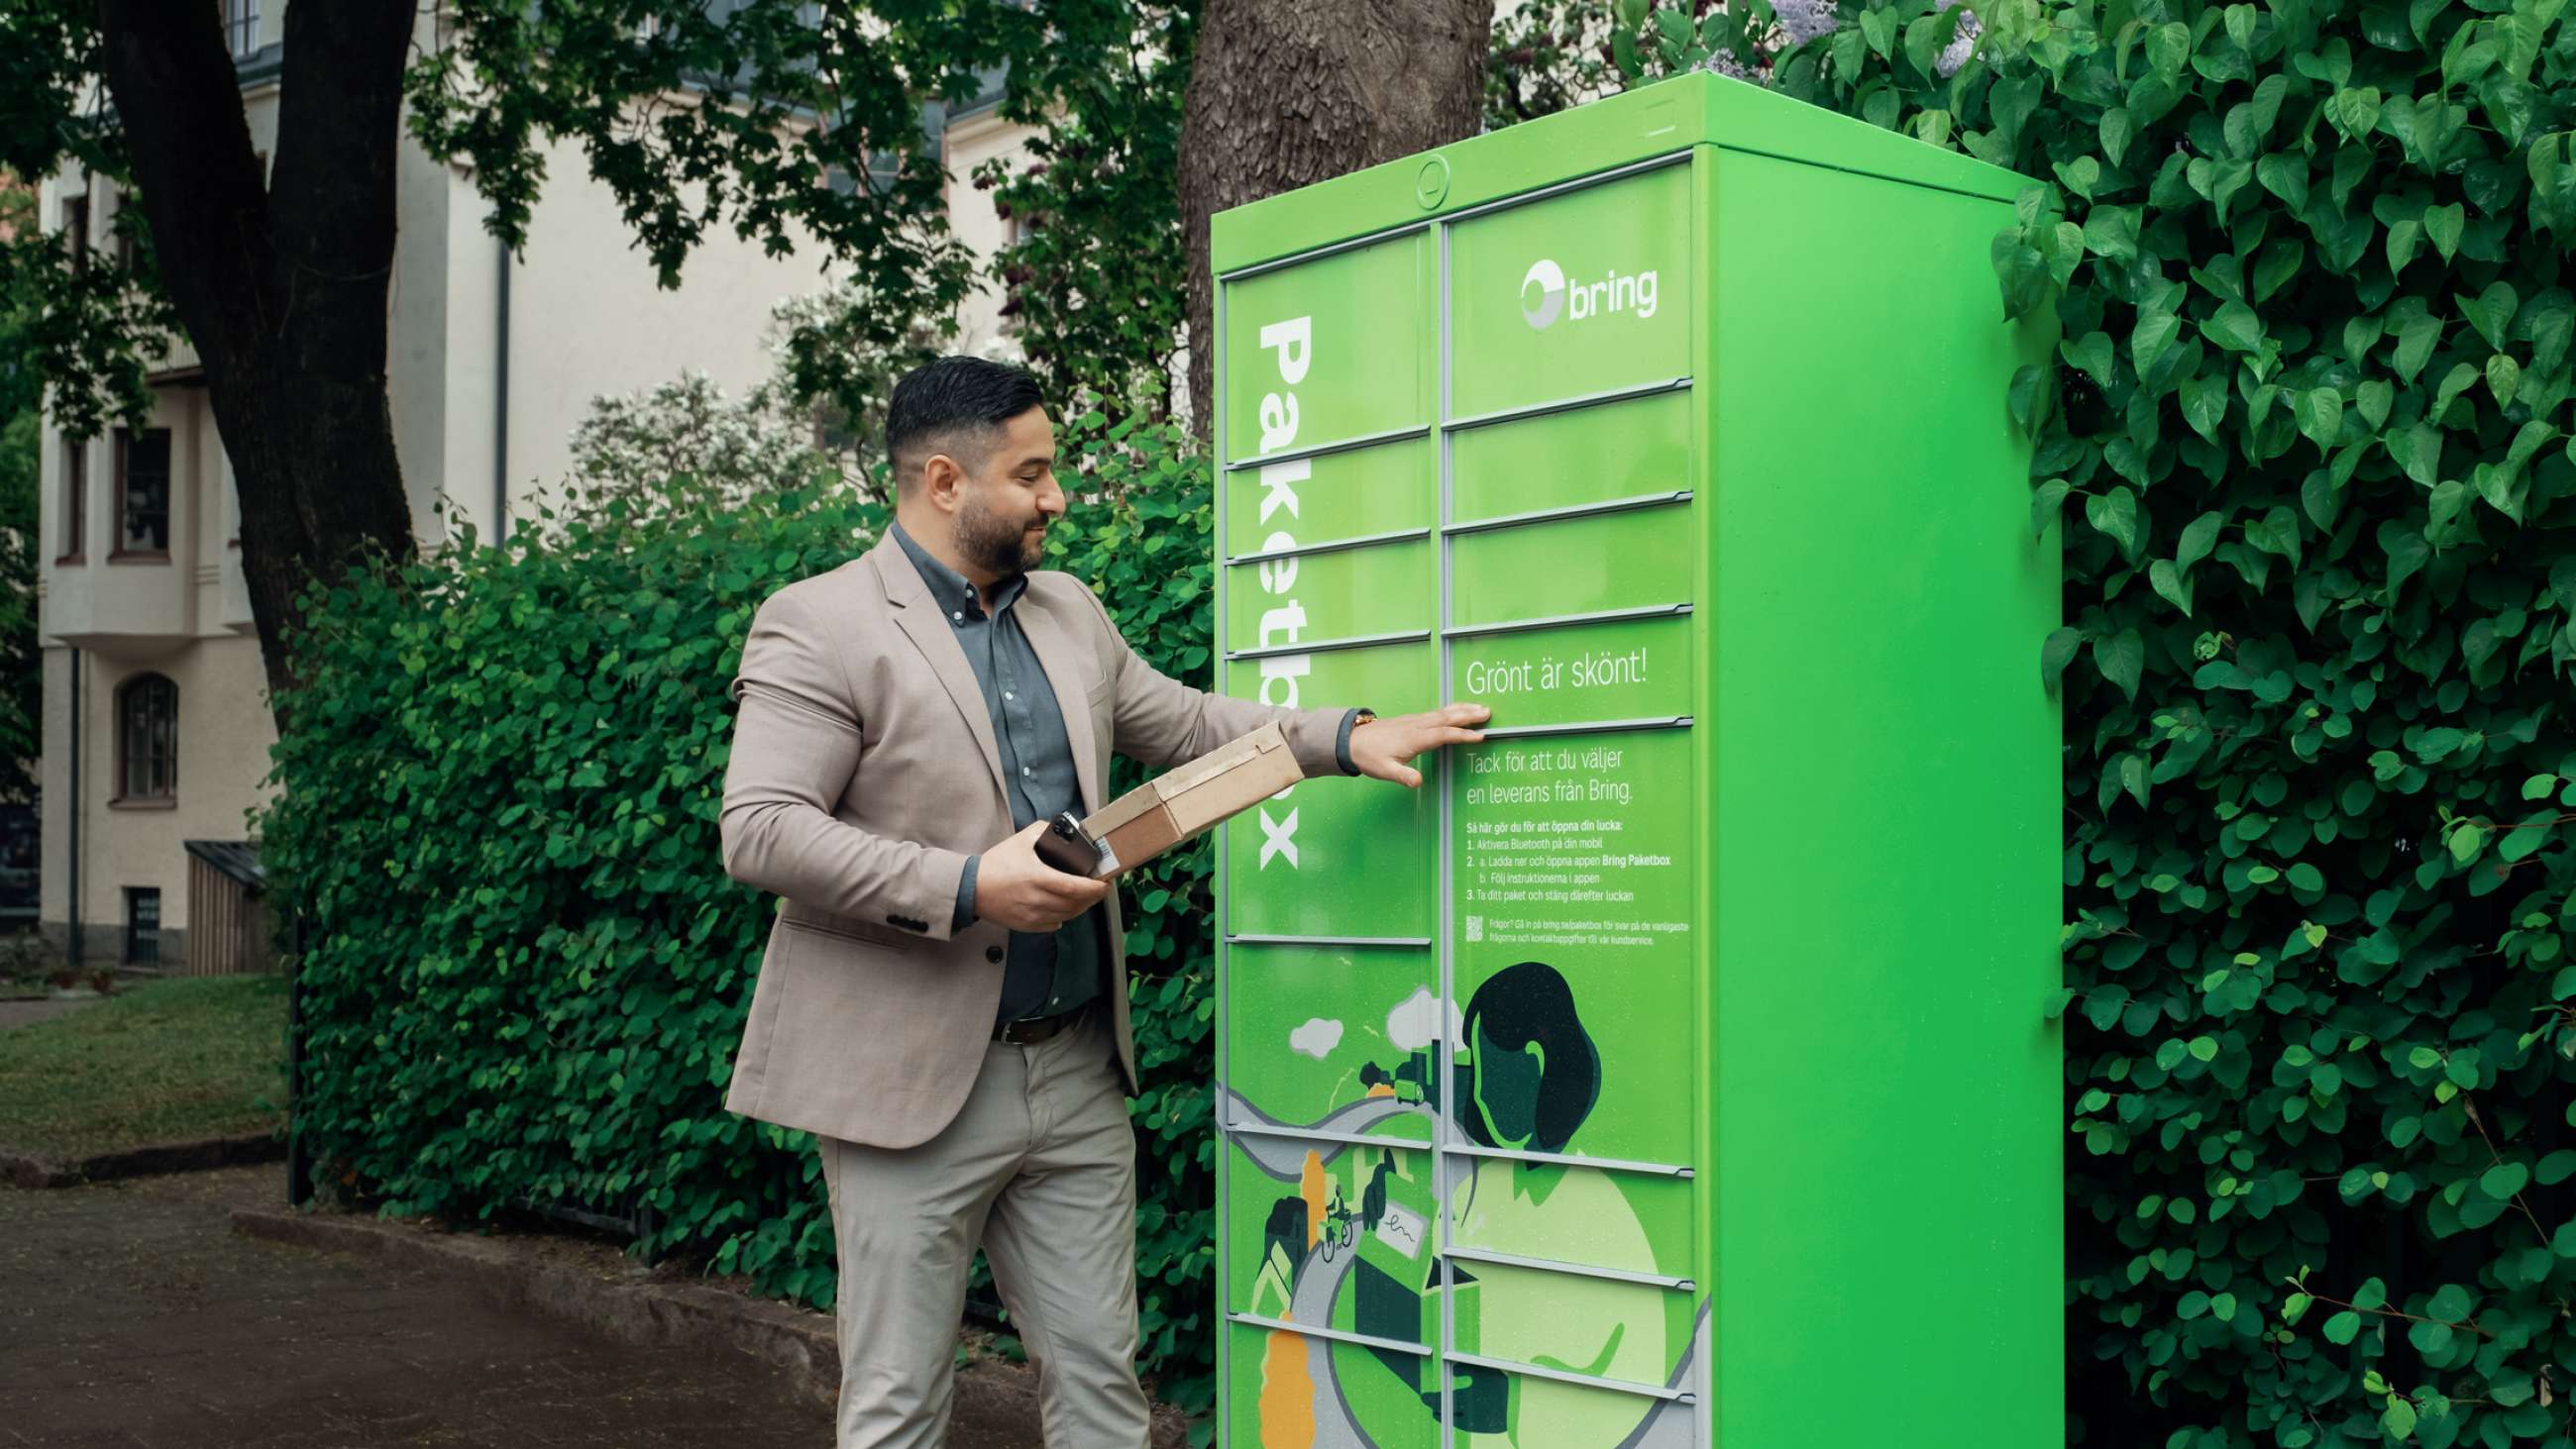 A man is picking up a parcel from a Bring parcel locker